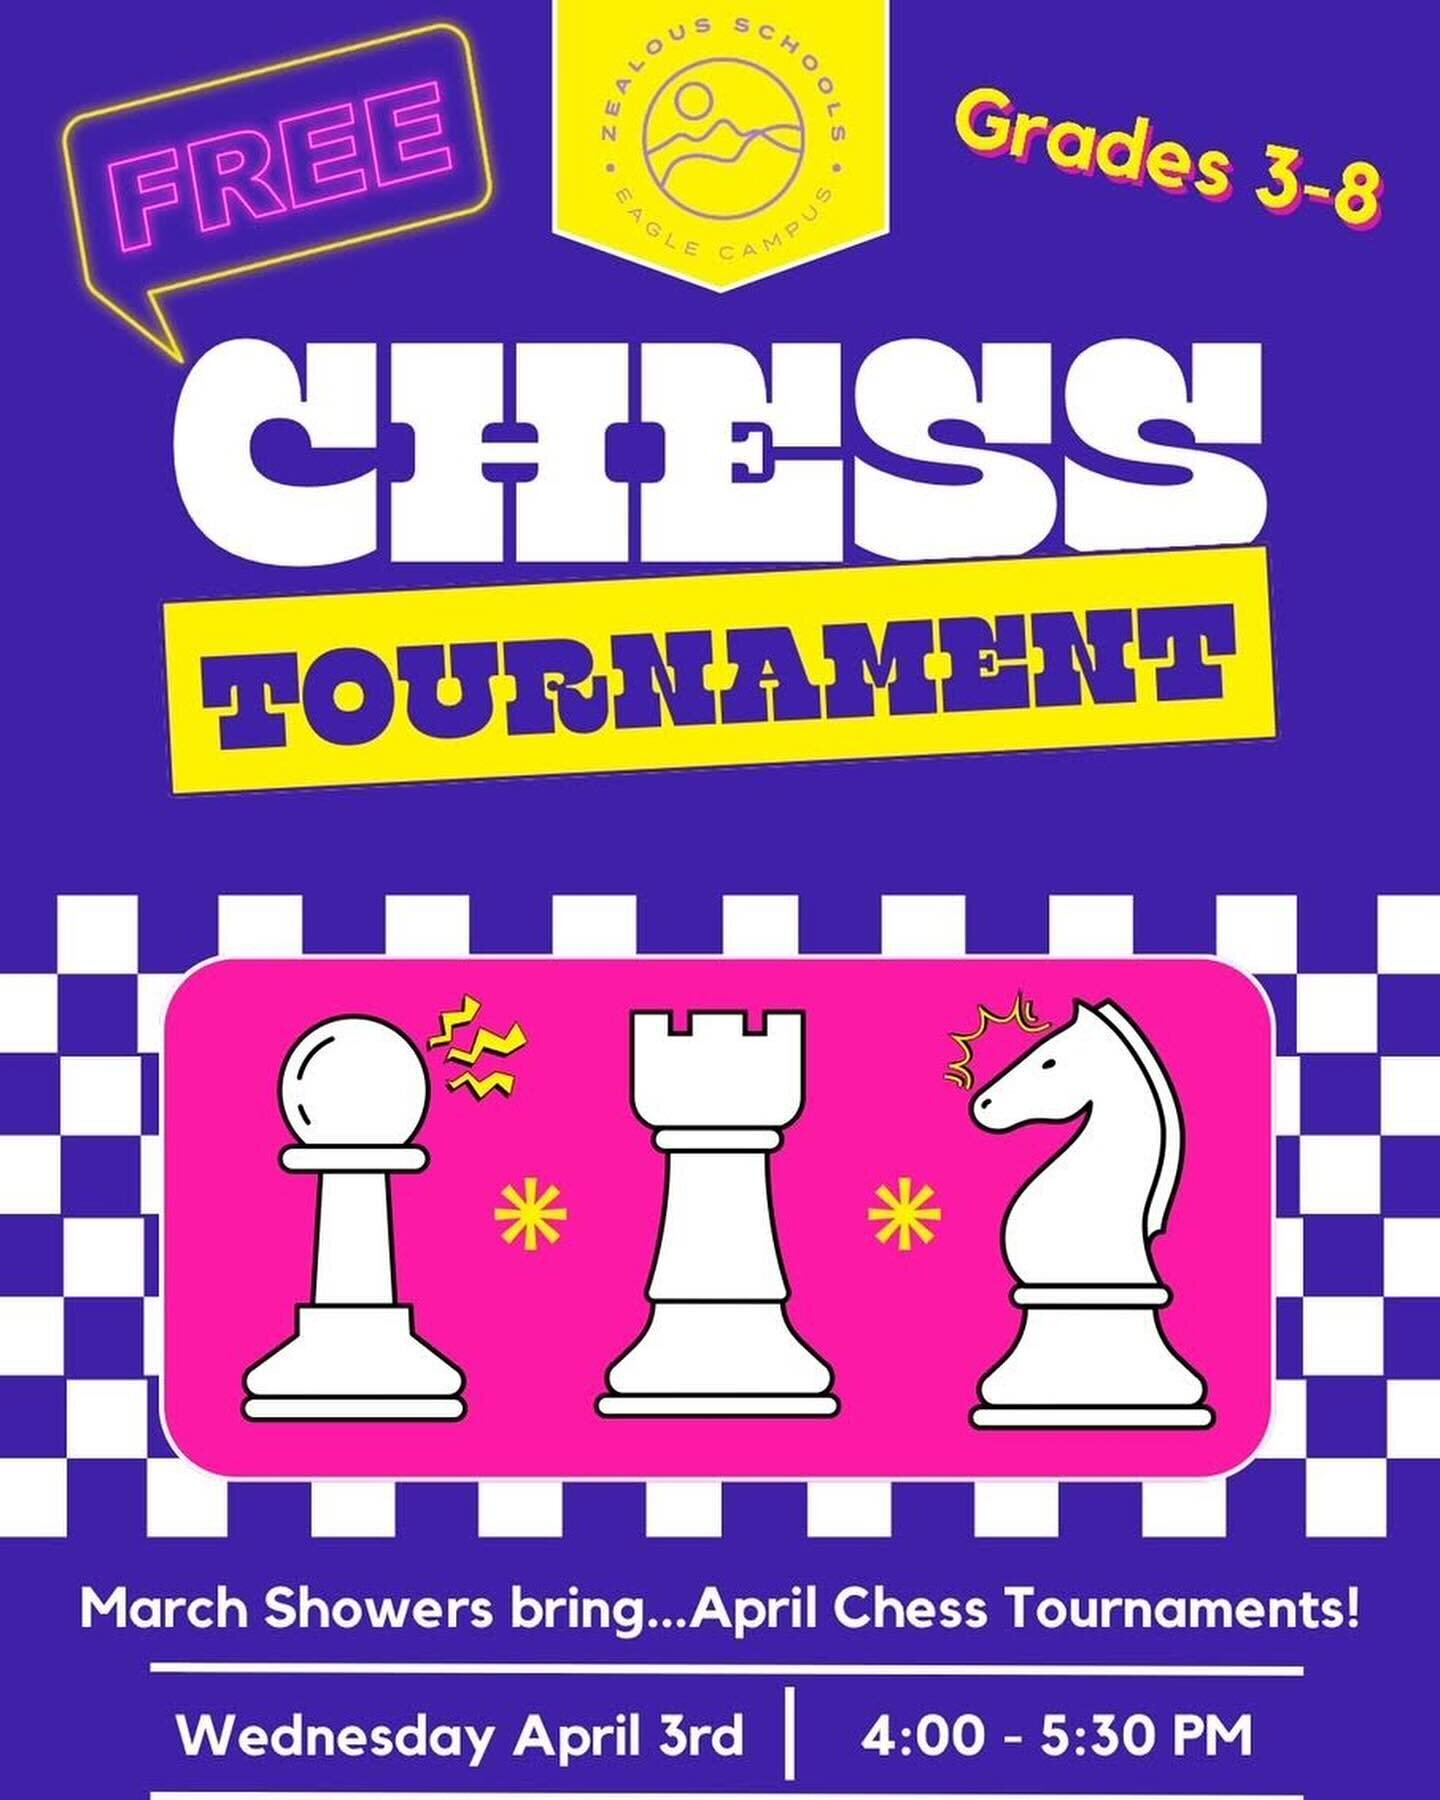 Zealous Chess Tournament THIS Wednesday! Come play ♟️